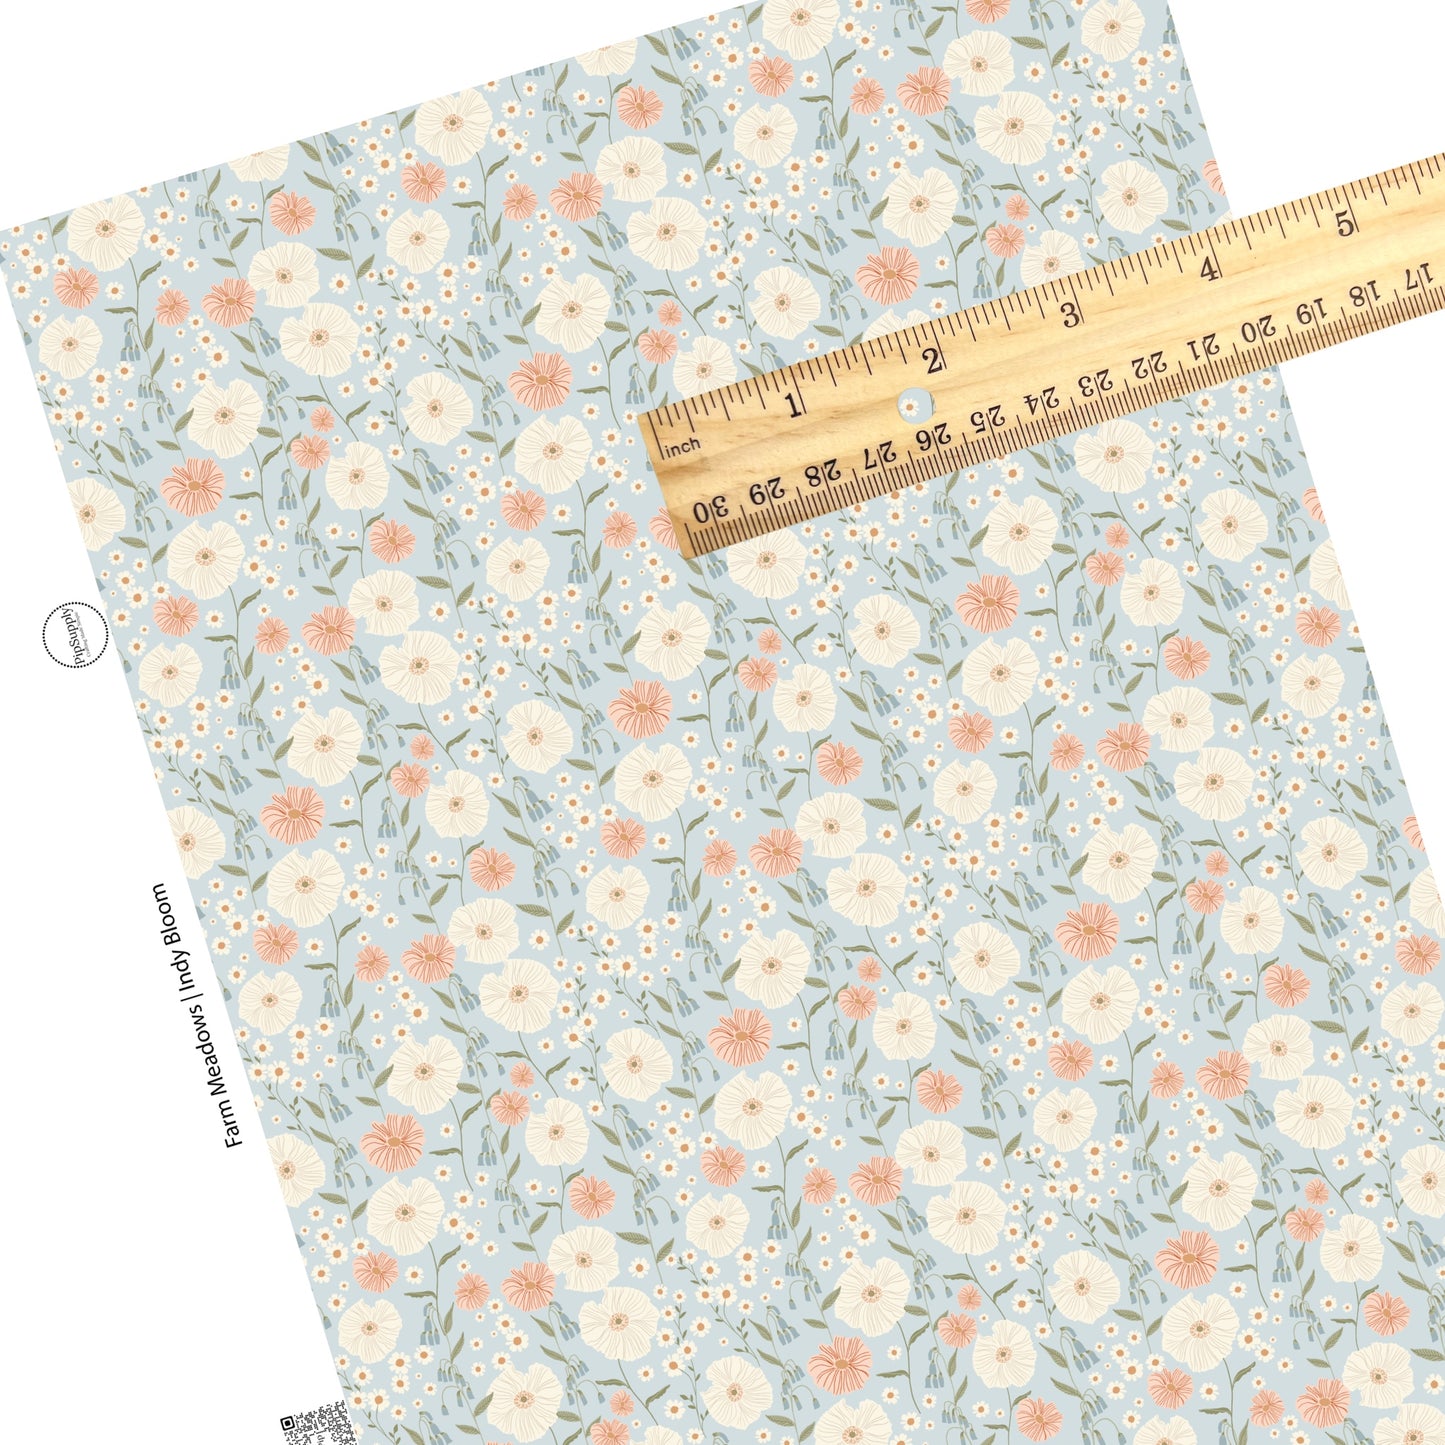 These pastel flowers in a meadow on light blue faux leather sheets contain the following design elements: tan, orange, cream, pink, and blush flowers.